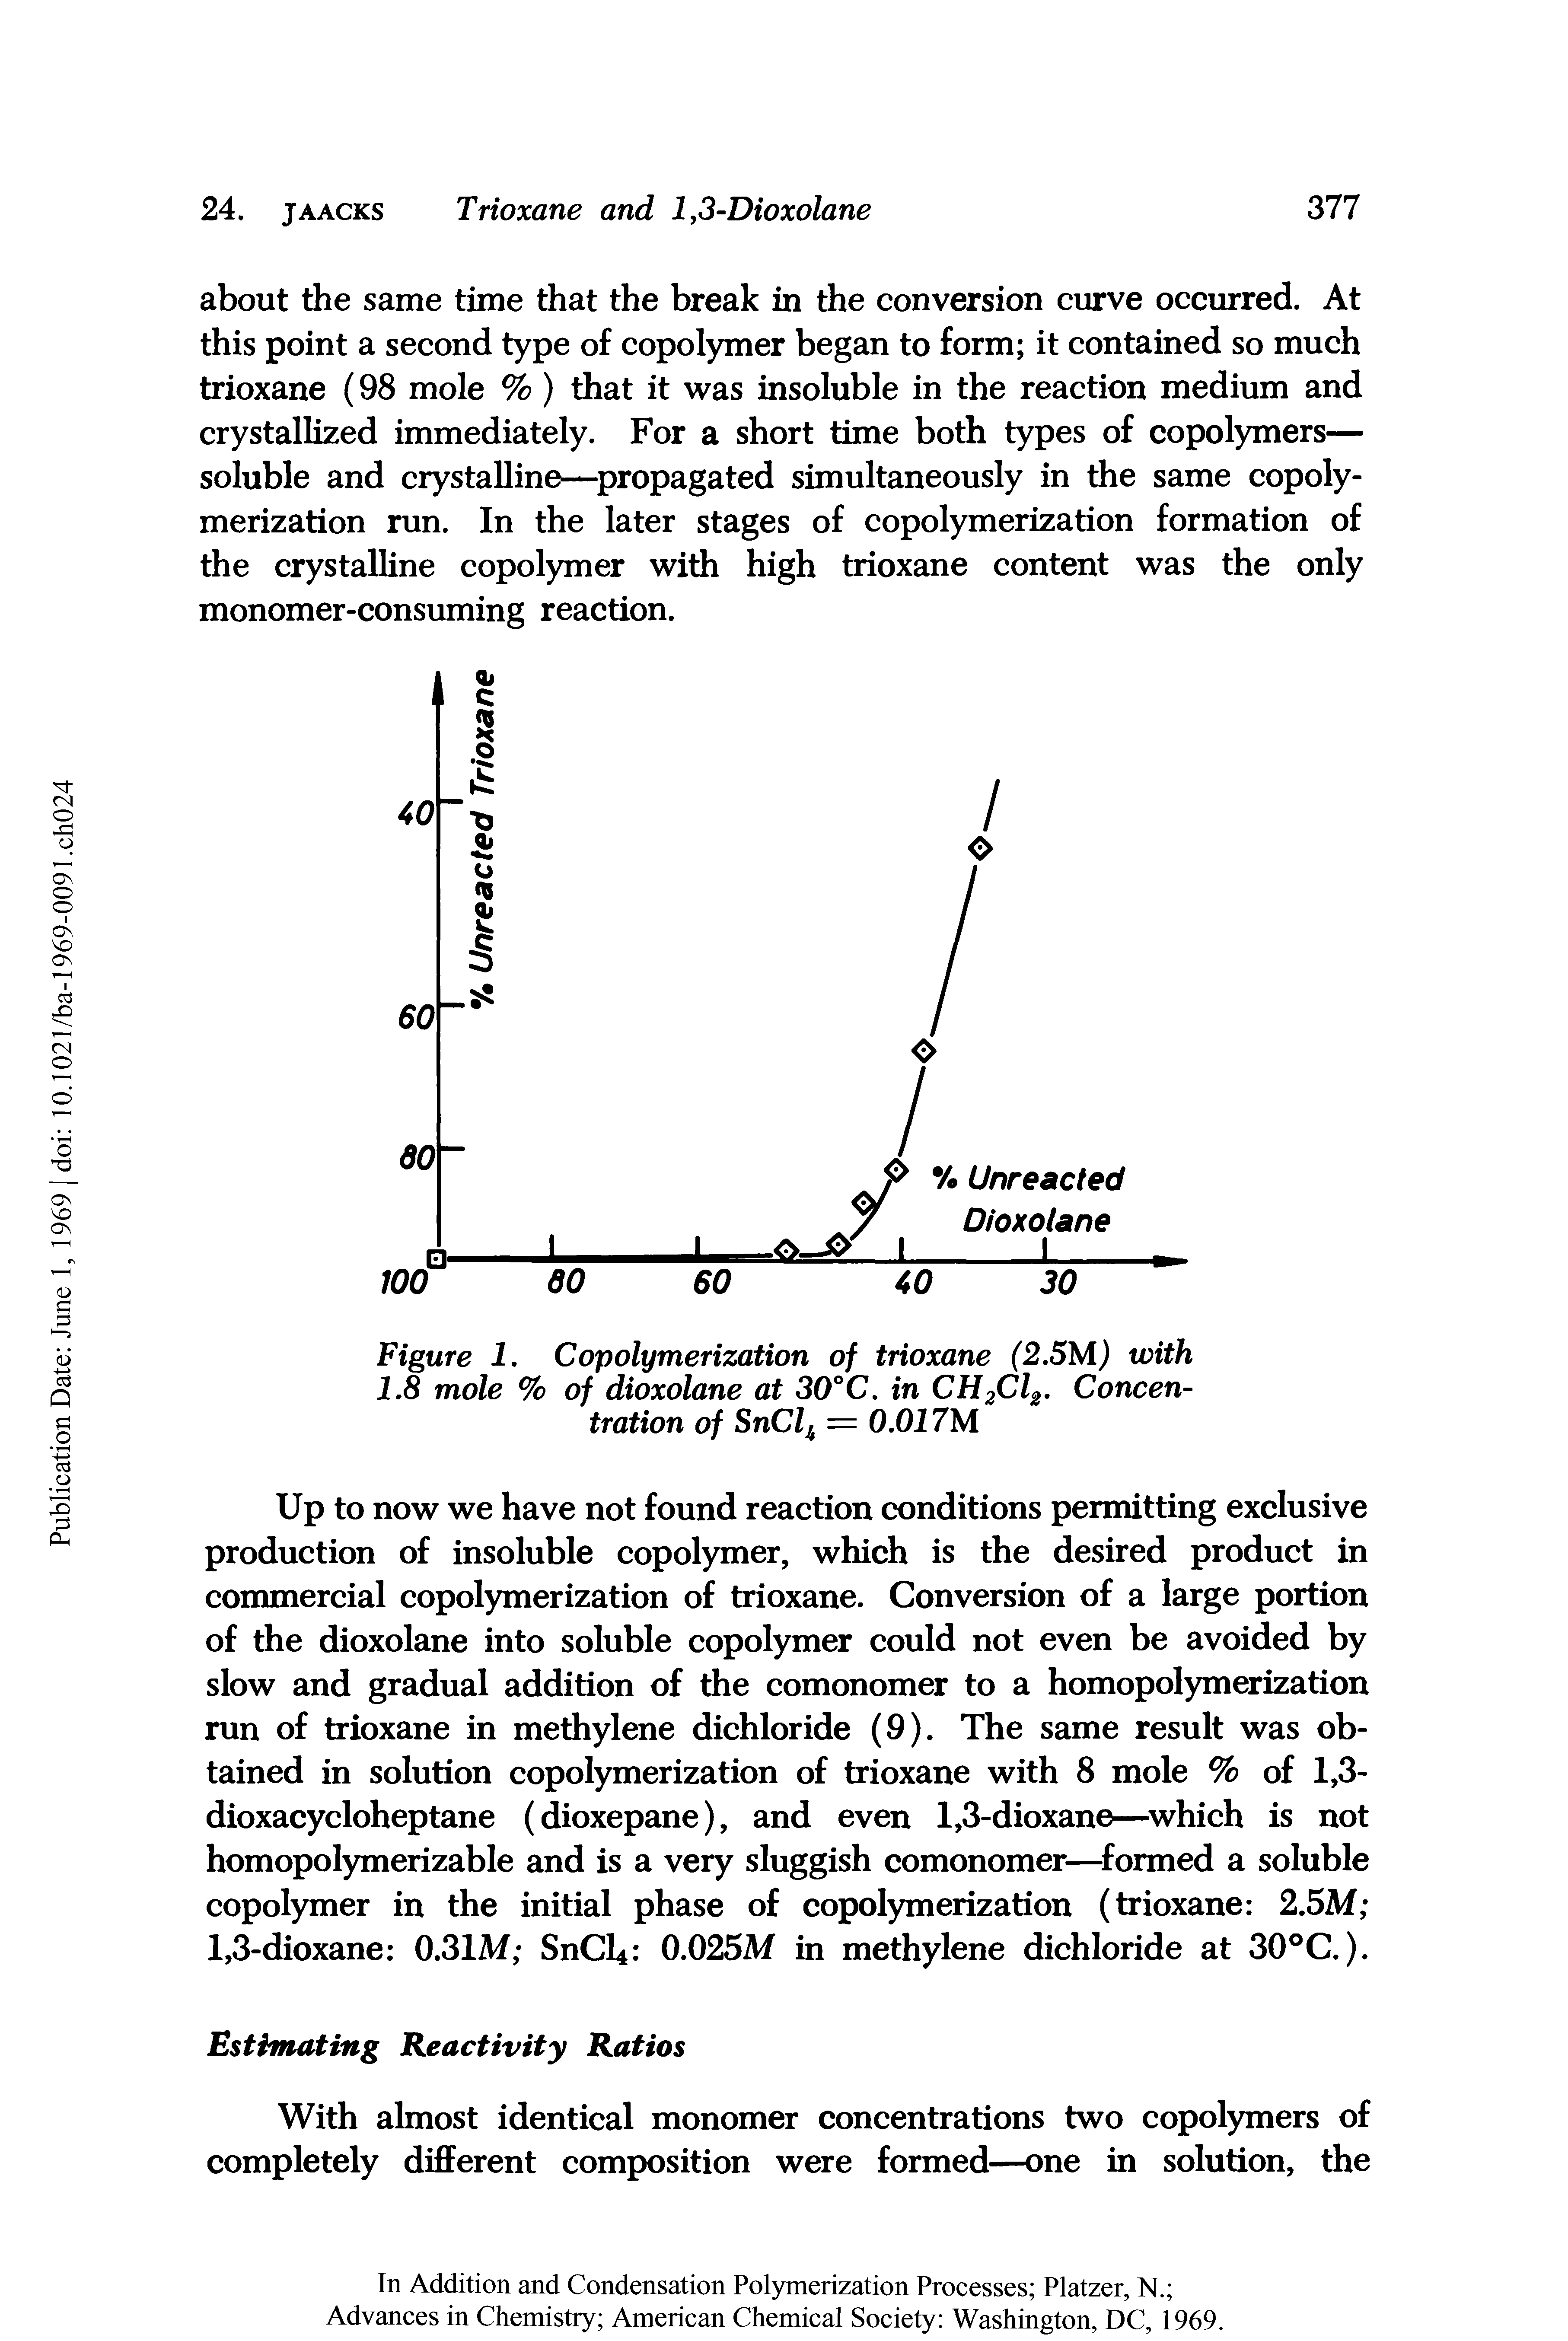 Figure 1. Copolymerization of trioxane (2.5MJ with 1.8 mole % of dioxolane at 30°C. in CH2Cl2. Concentration of SnClh = 0.017M...